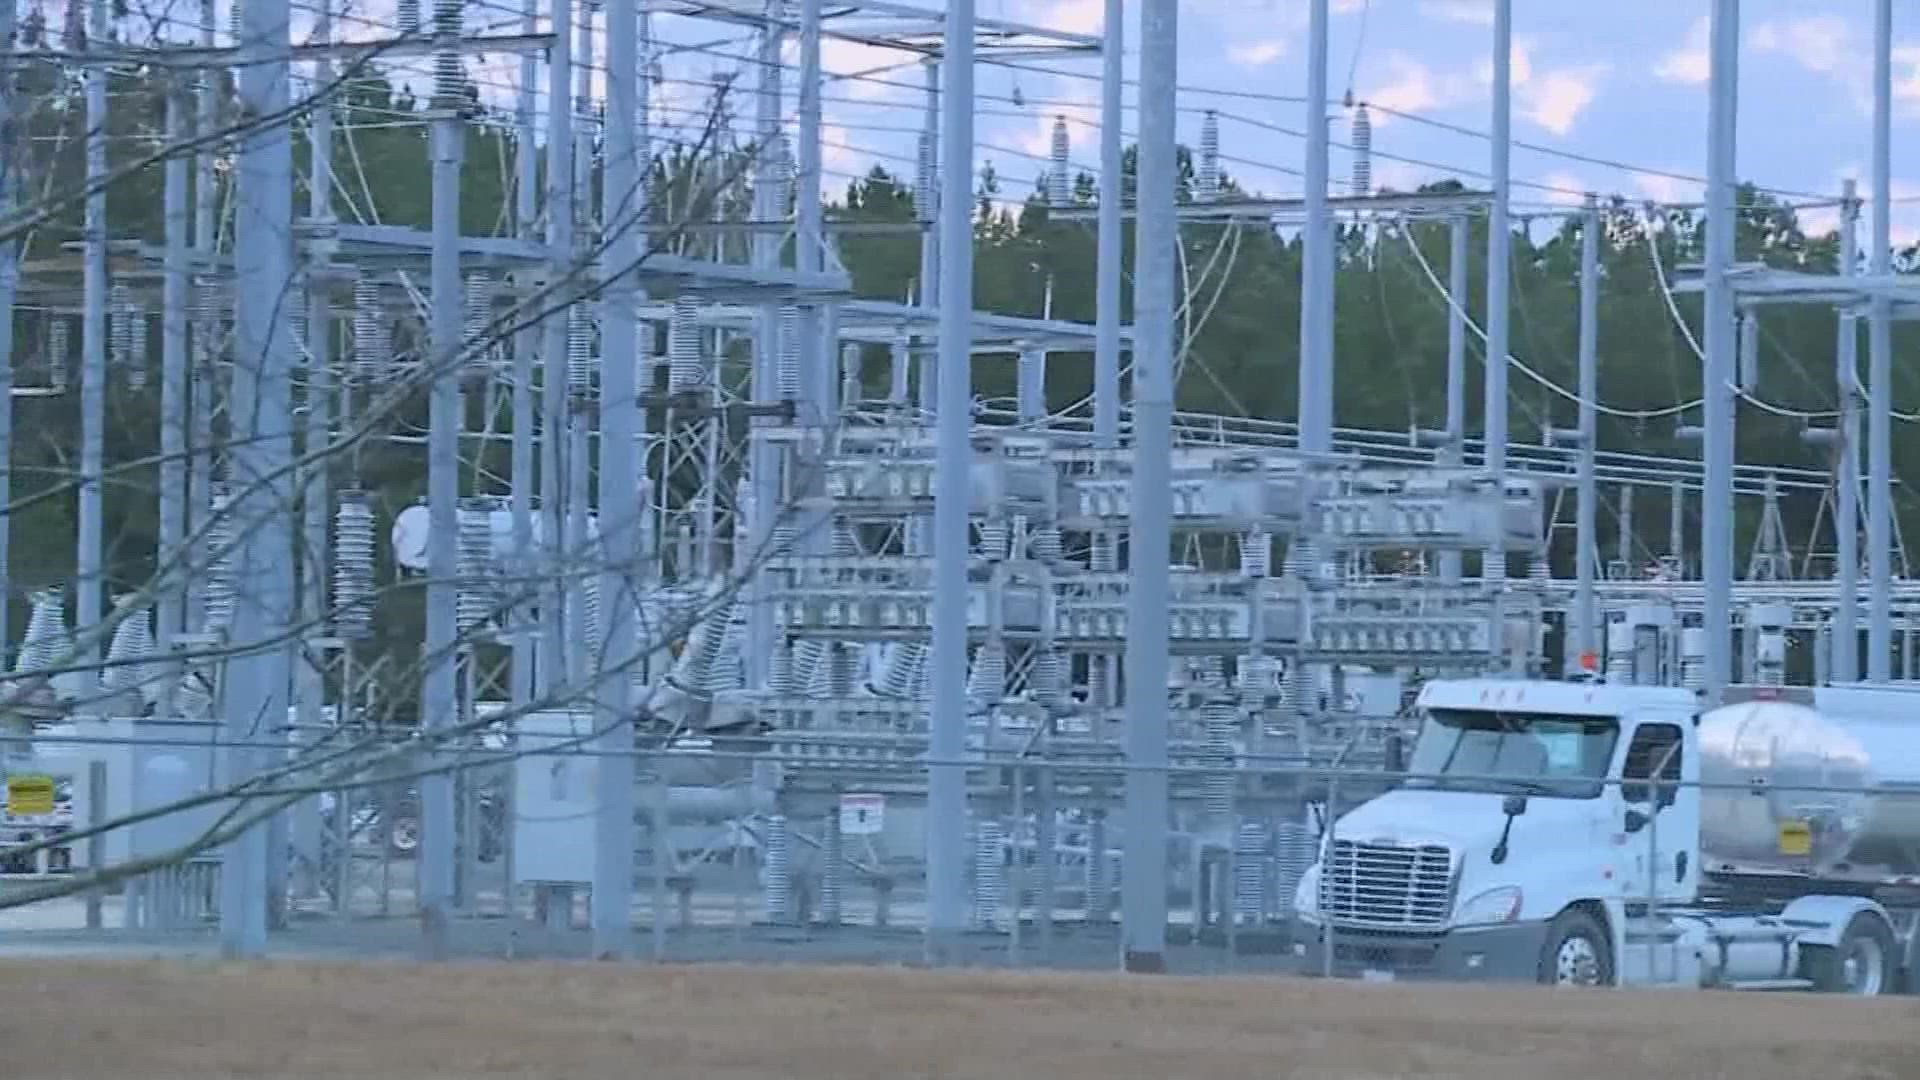 Washington law enforcement sources say they received a memo from the FBI warning them about attacks to power stations in the Pacific Northwest.